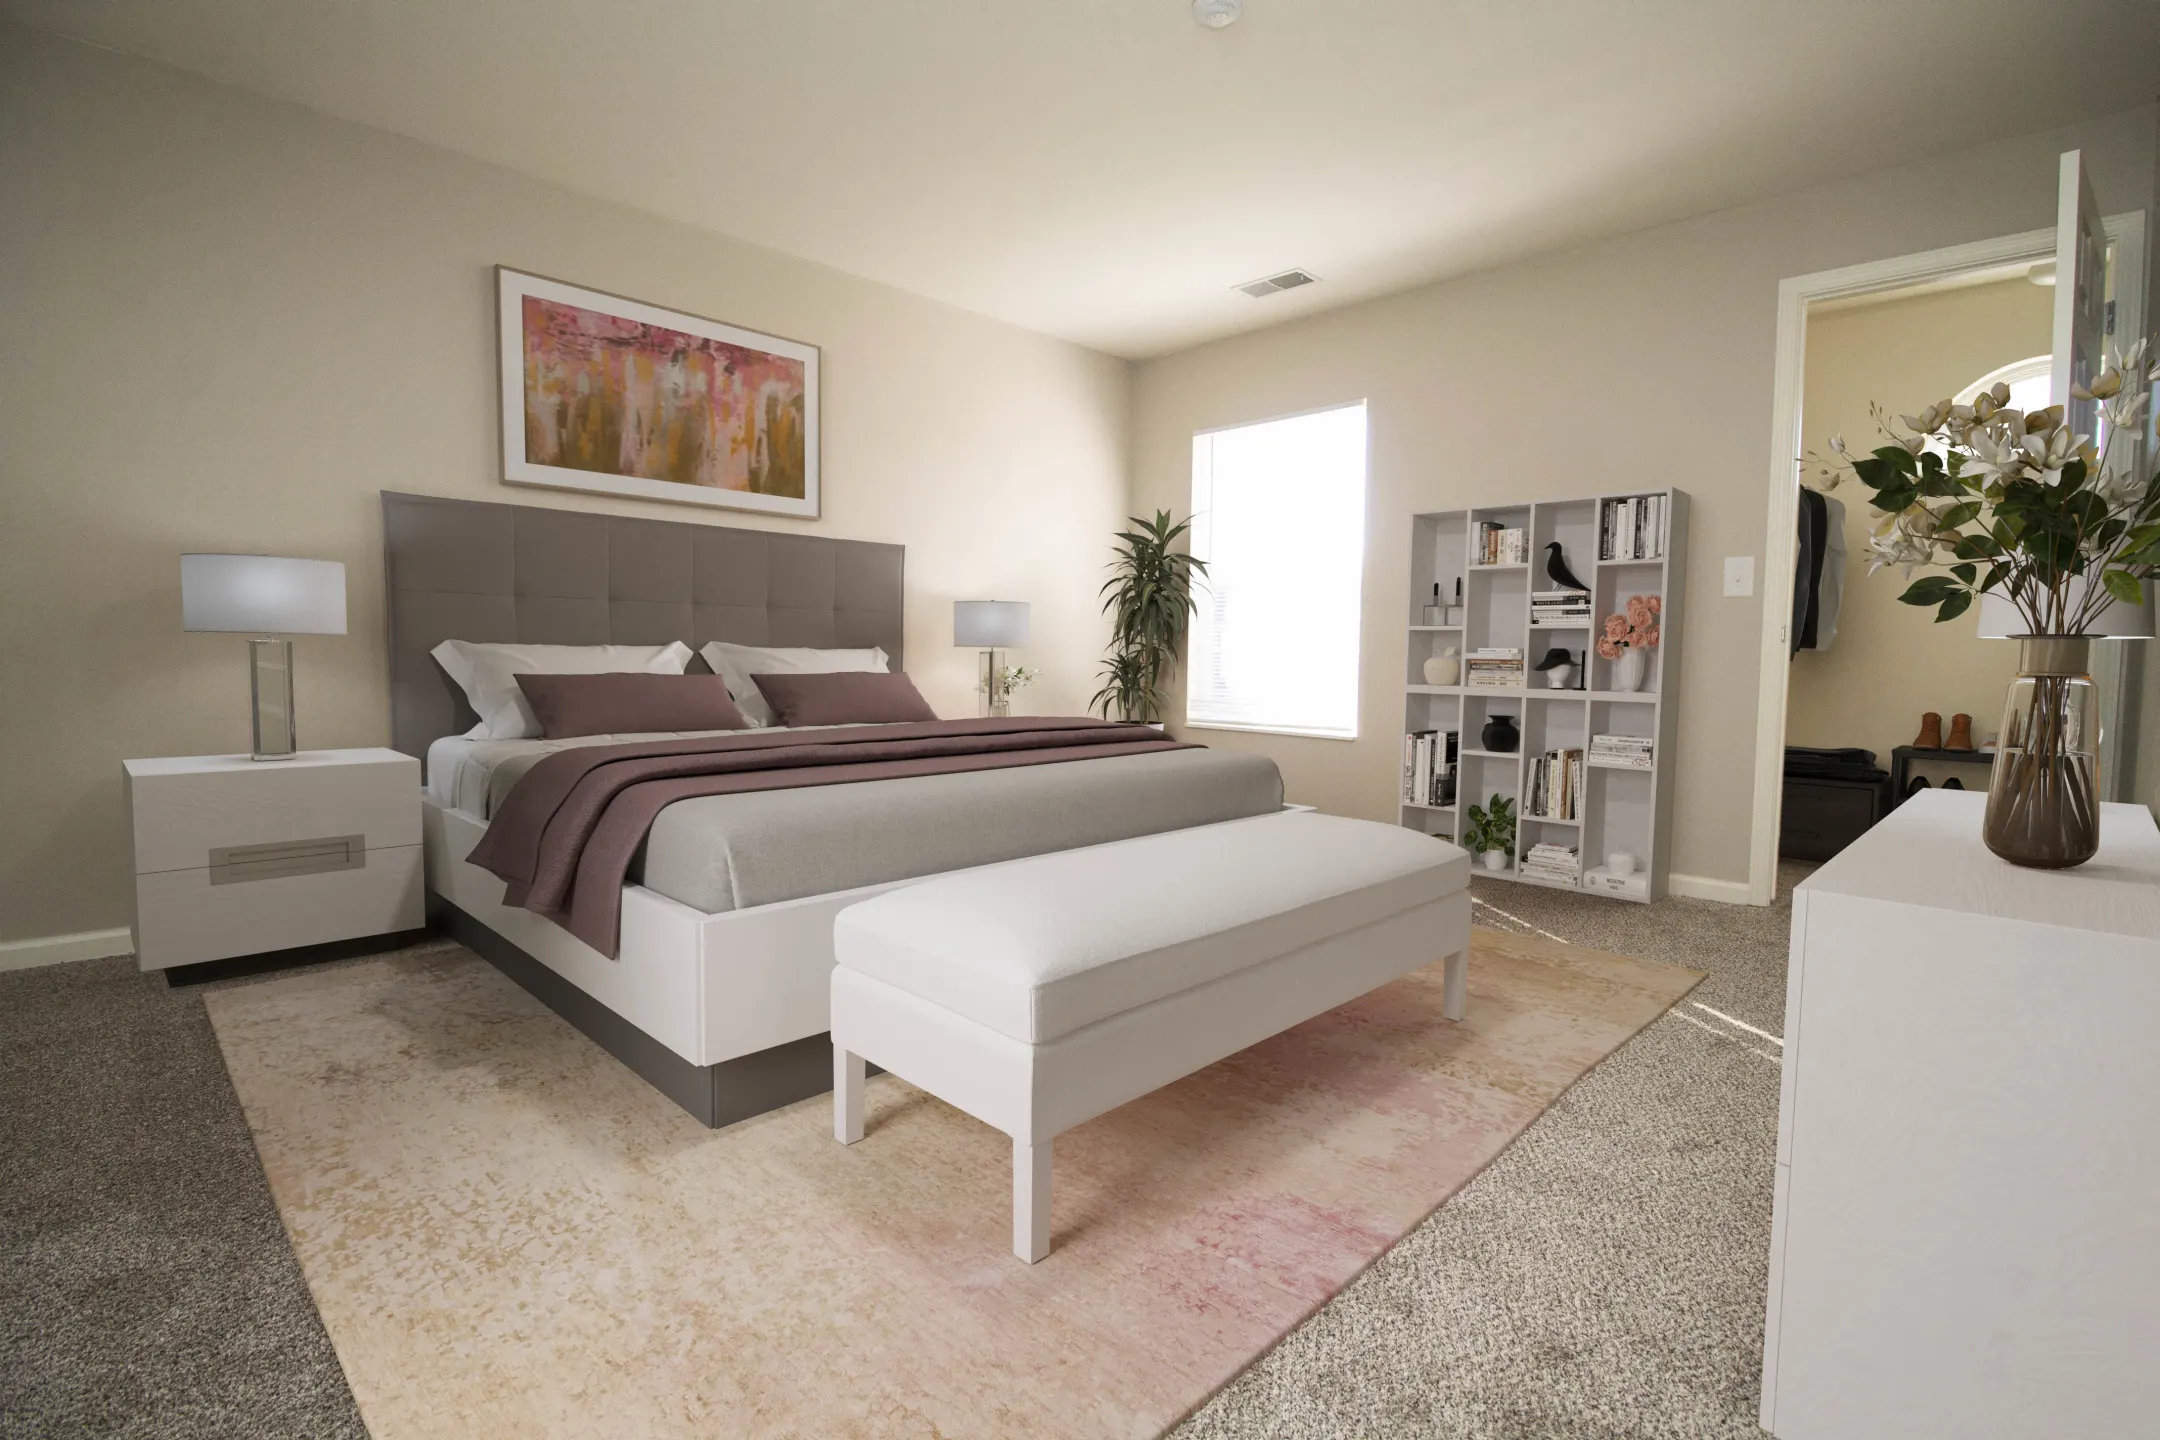 Bedroom - The Pointe at Canton Apartments & Townhomes - Canton, MI